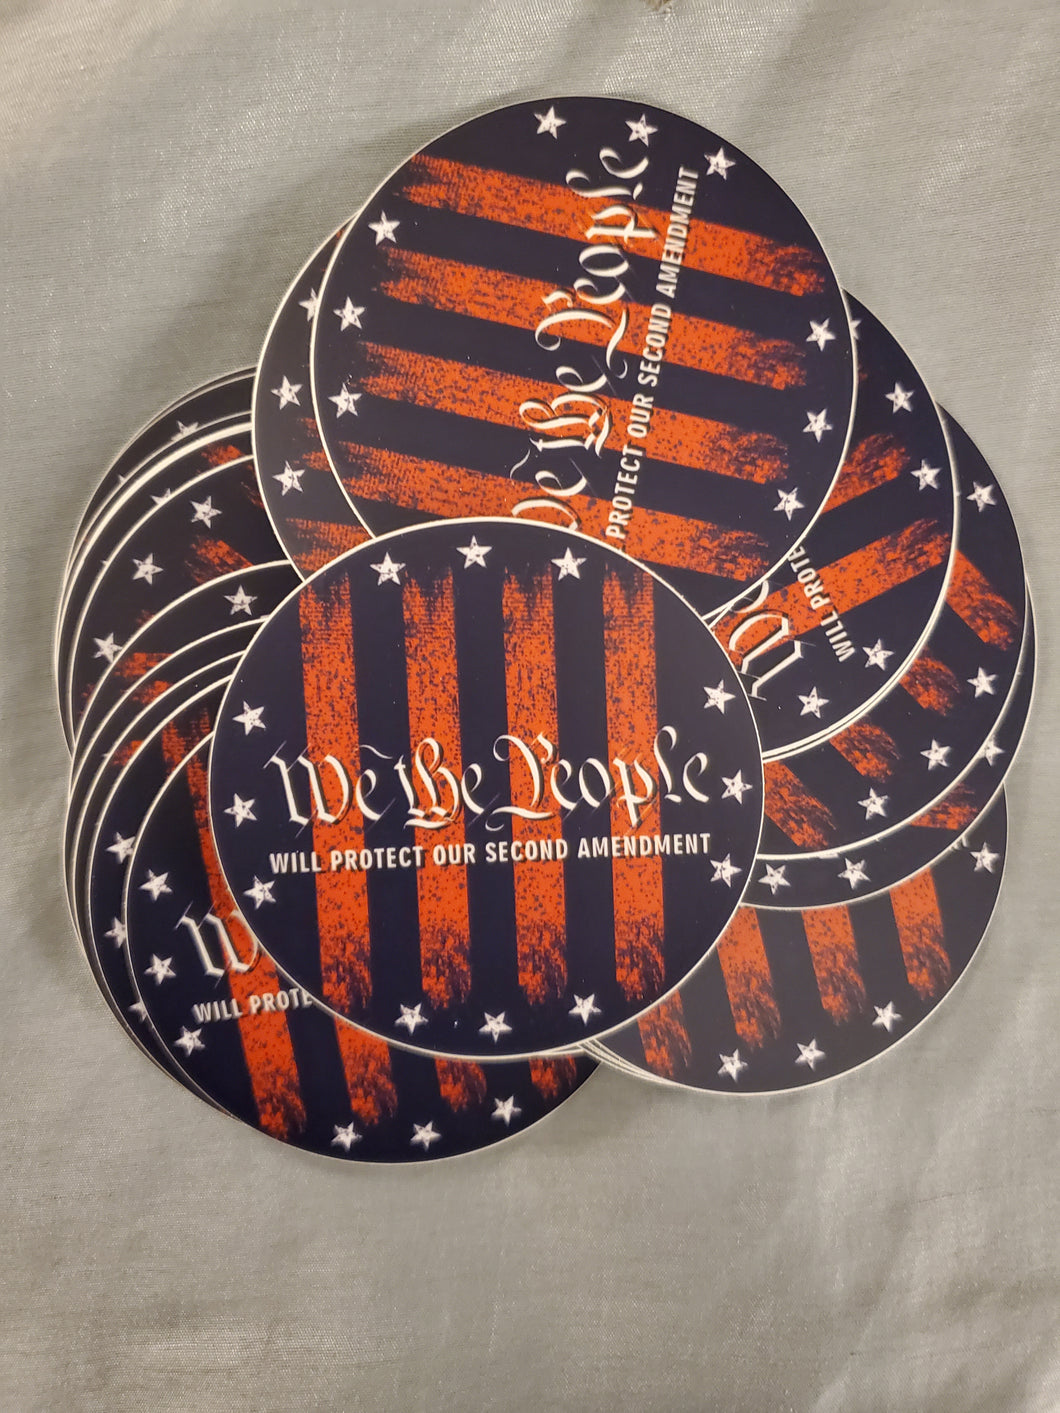 We are the People Round Stickers